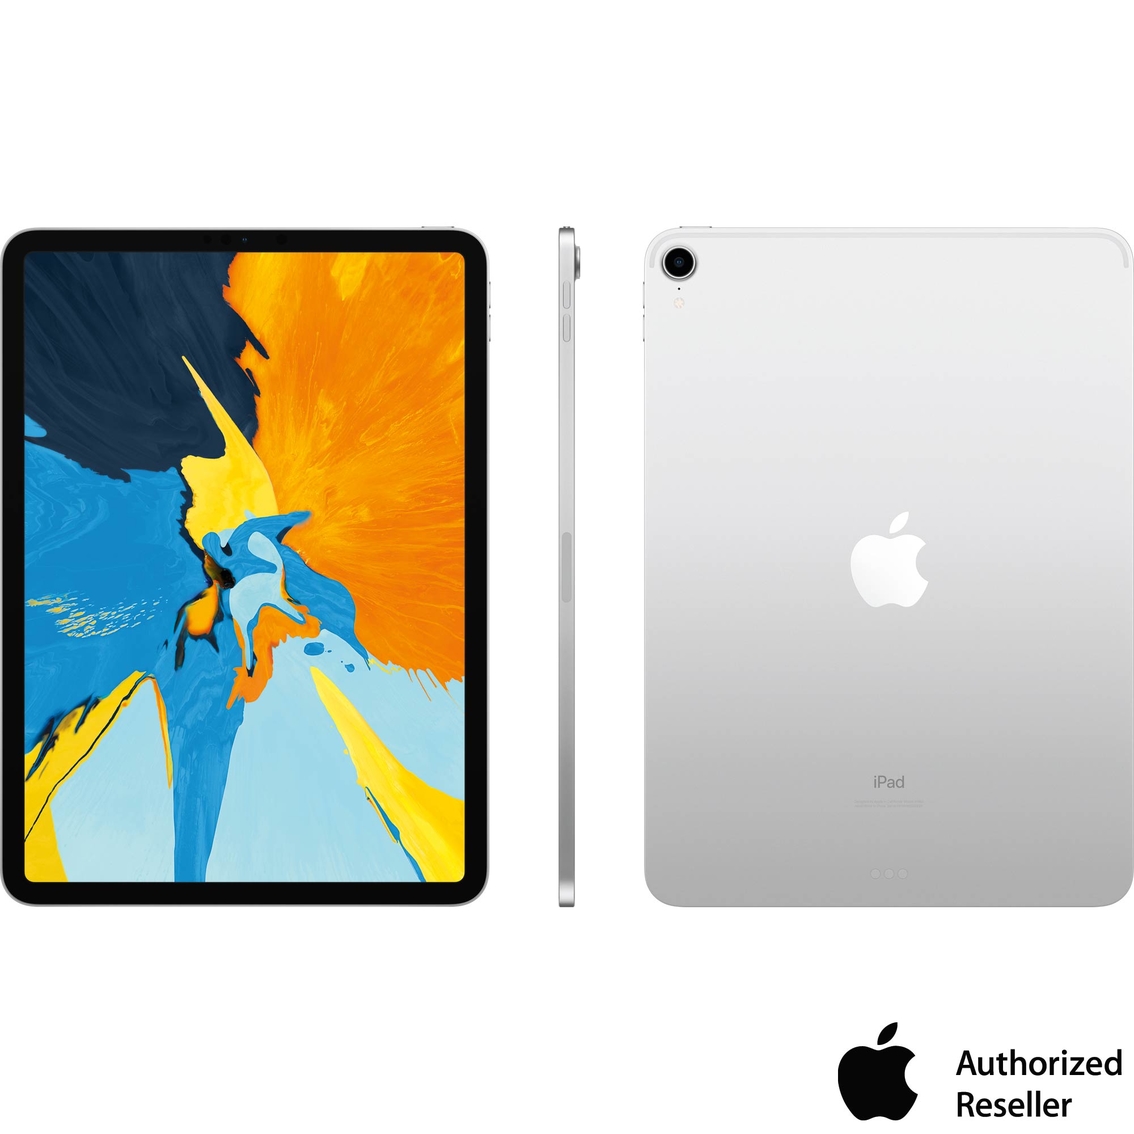 Apple iPad Pro 11 in. 512GB with WiFi - Image 2 of 2